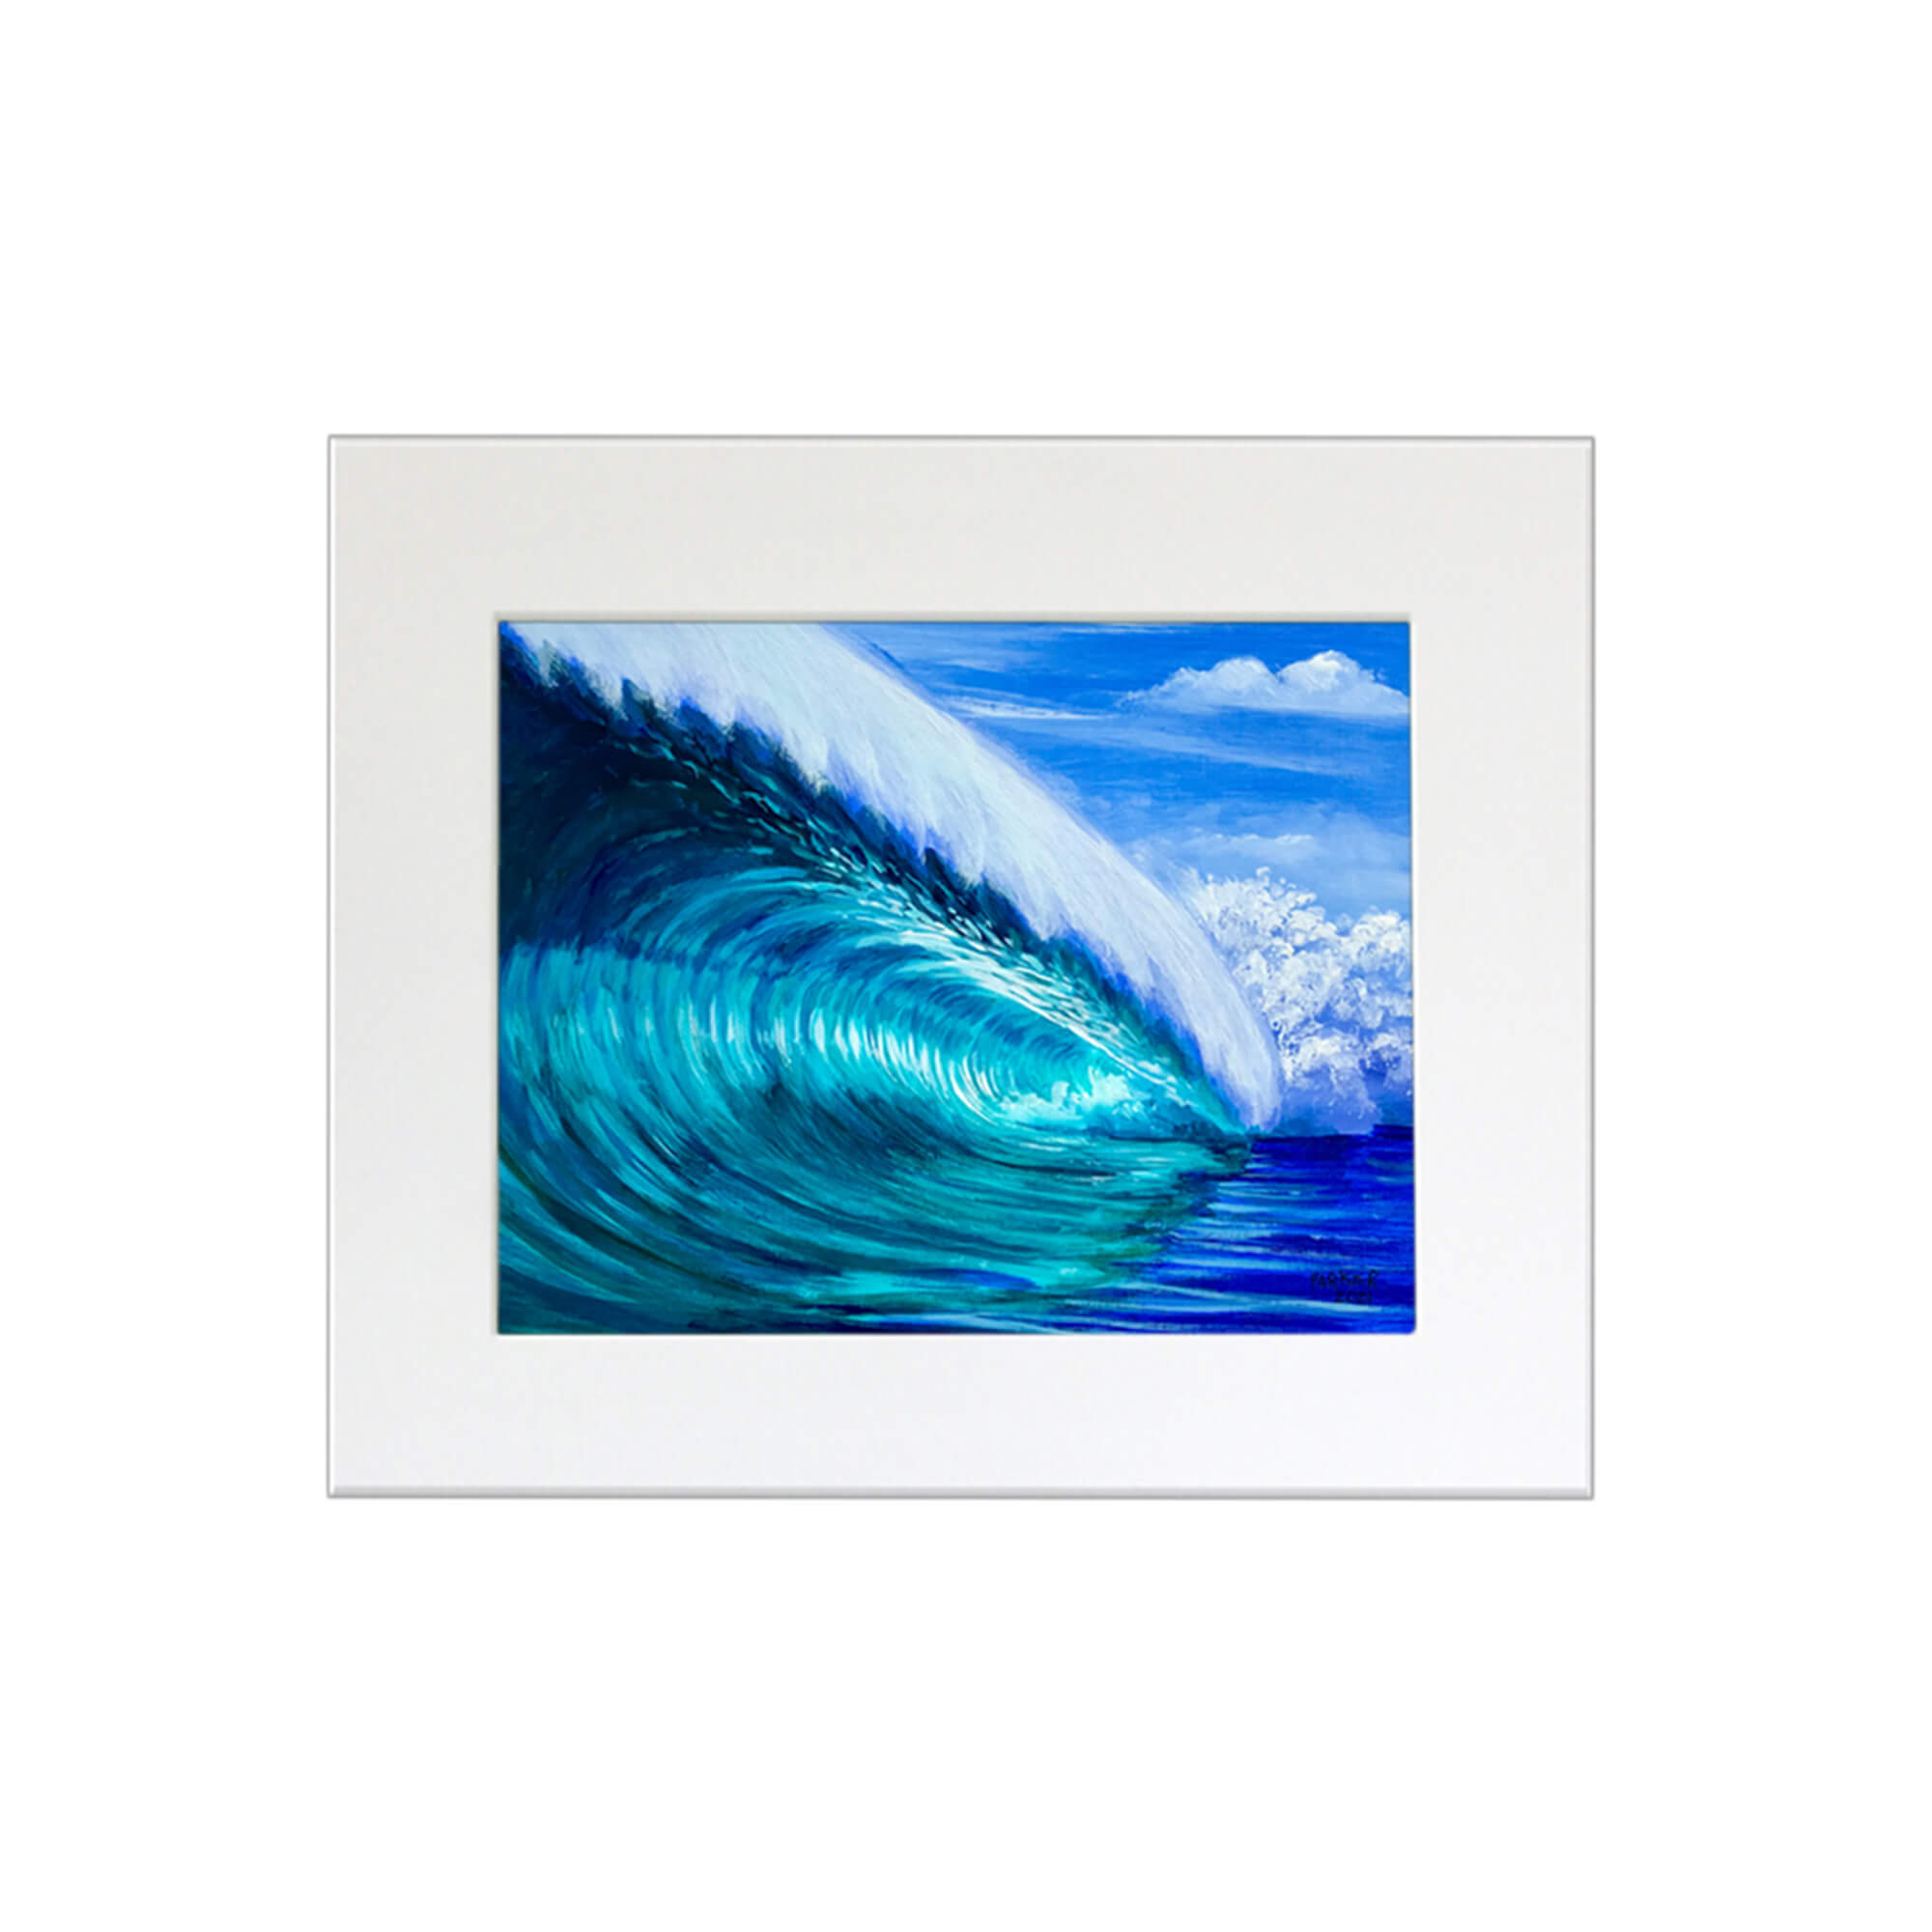 An original painting in mat featuring a perfect teal and blue colored barrel wave by Maui artist Patrick Parker